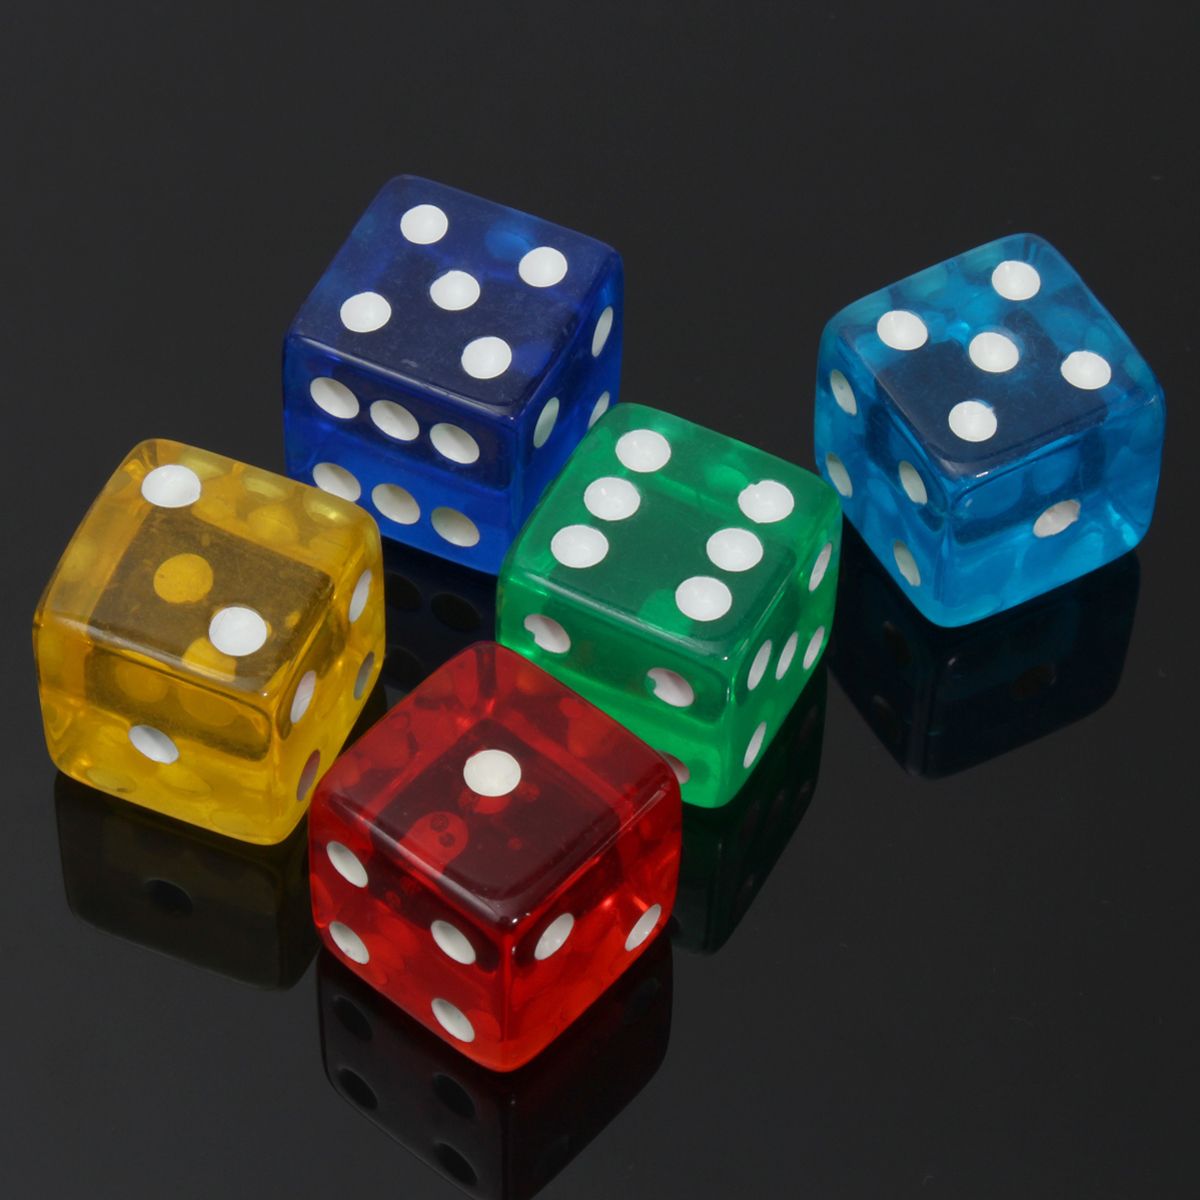 10PCS-19mm-Acrylic-Gaming-Dice-Standard-Six-Sided-Die-5-Colors-1173315